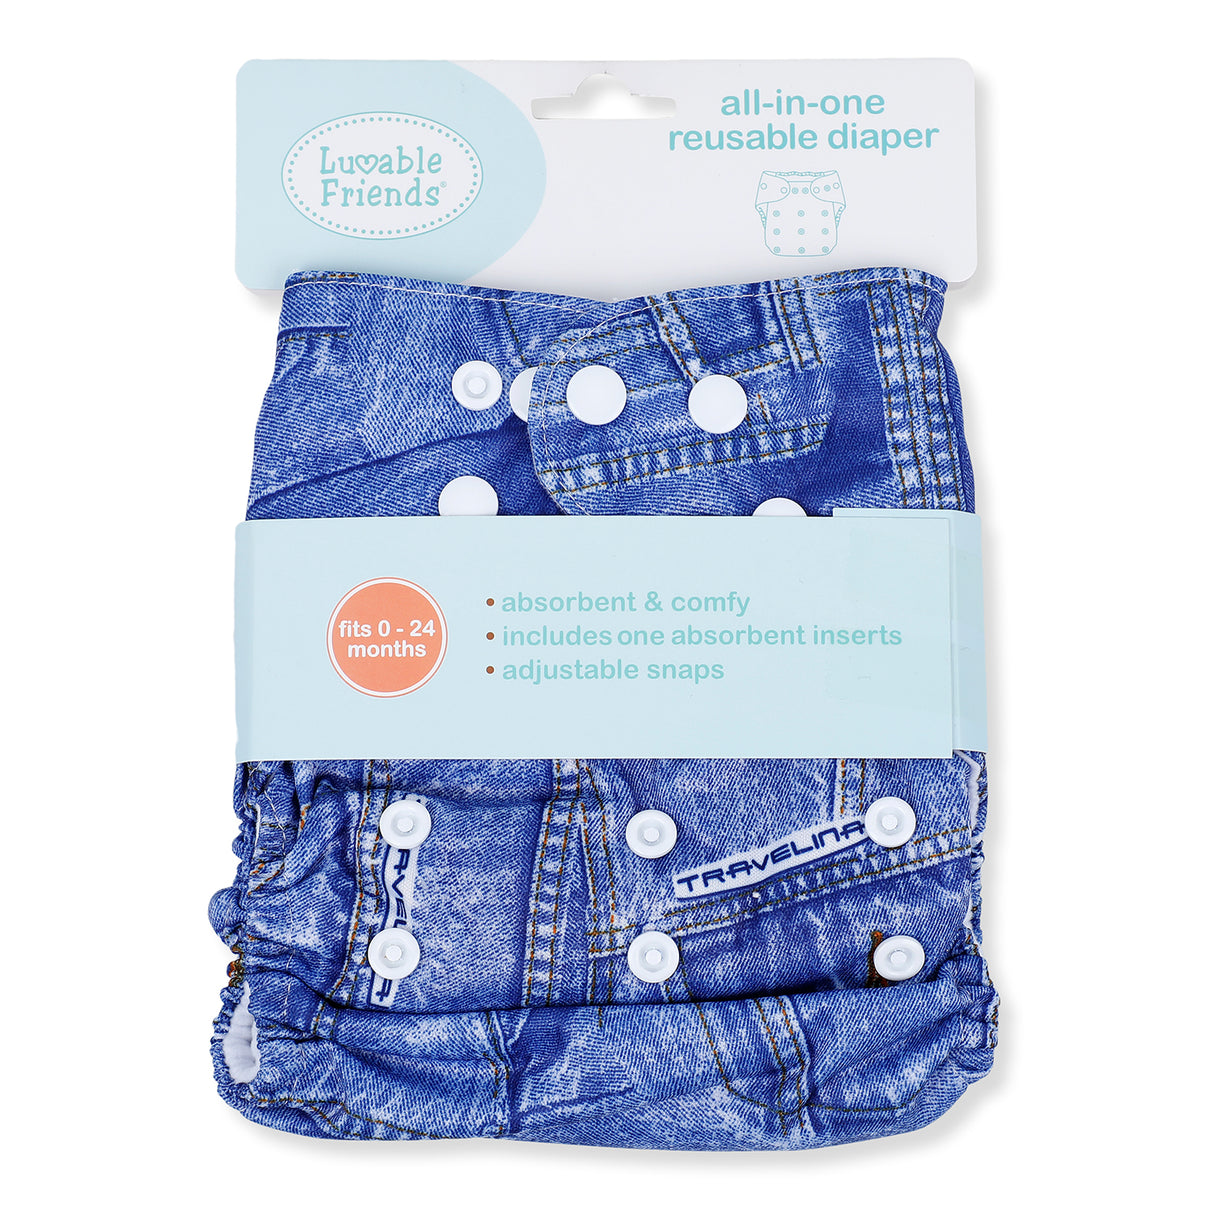 Luvable Friends Reusable And Adjustable Diaper